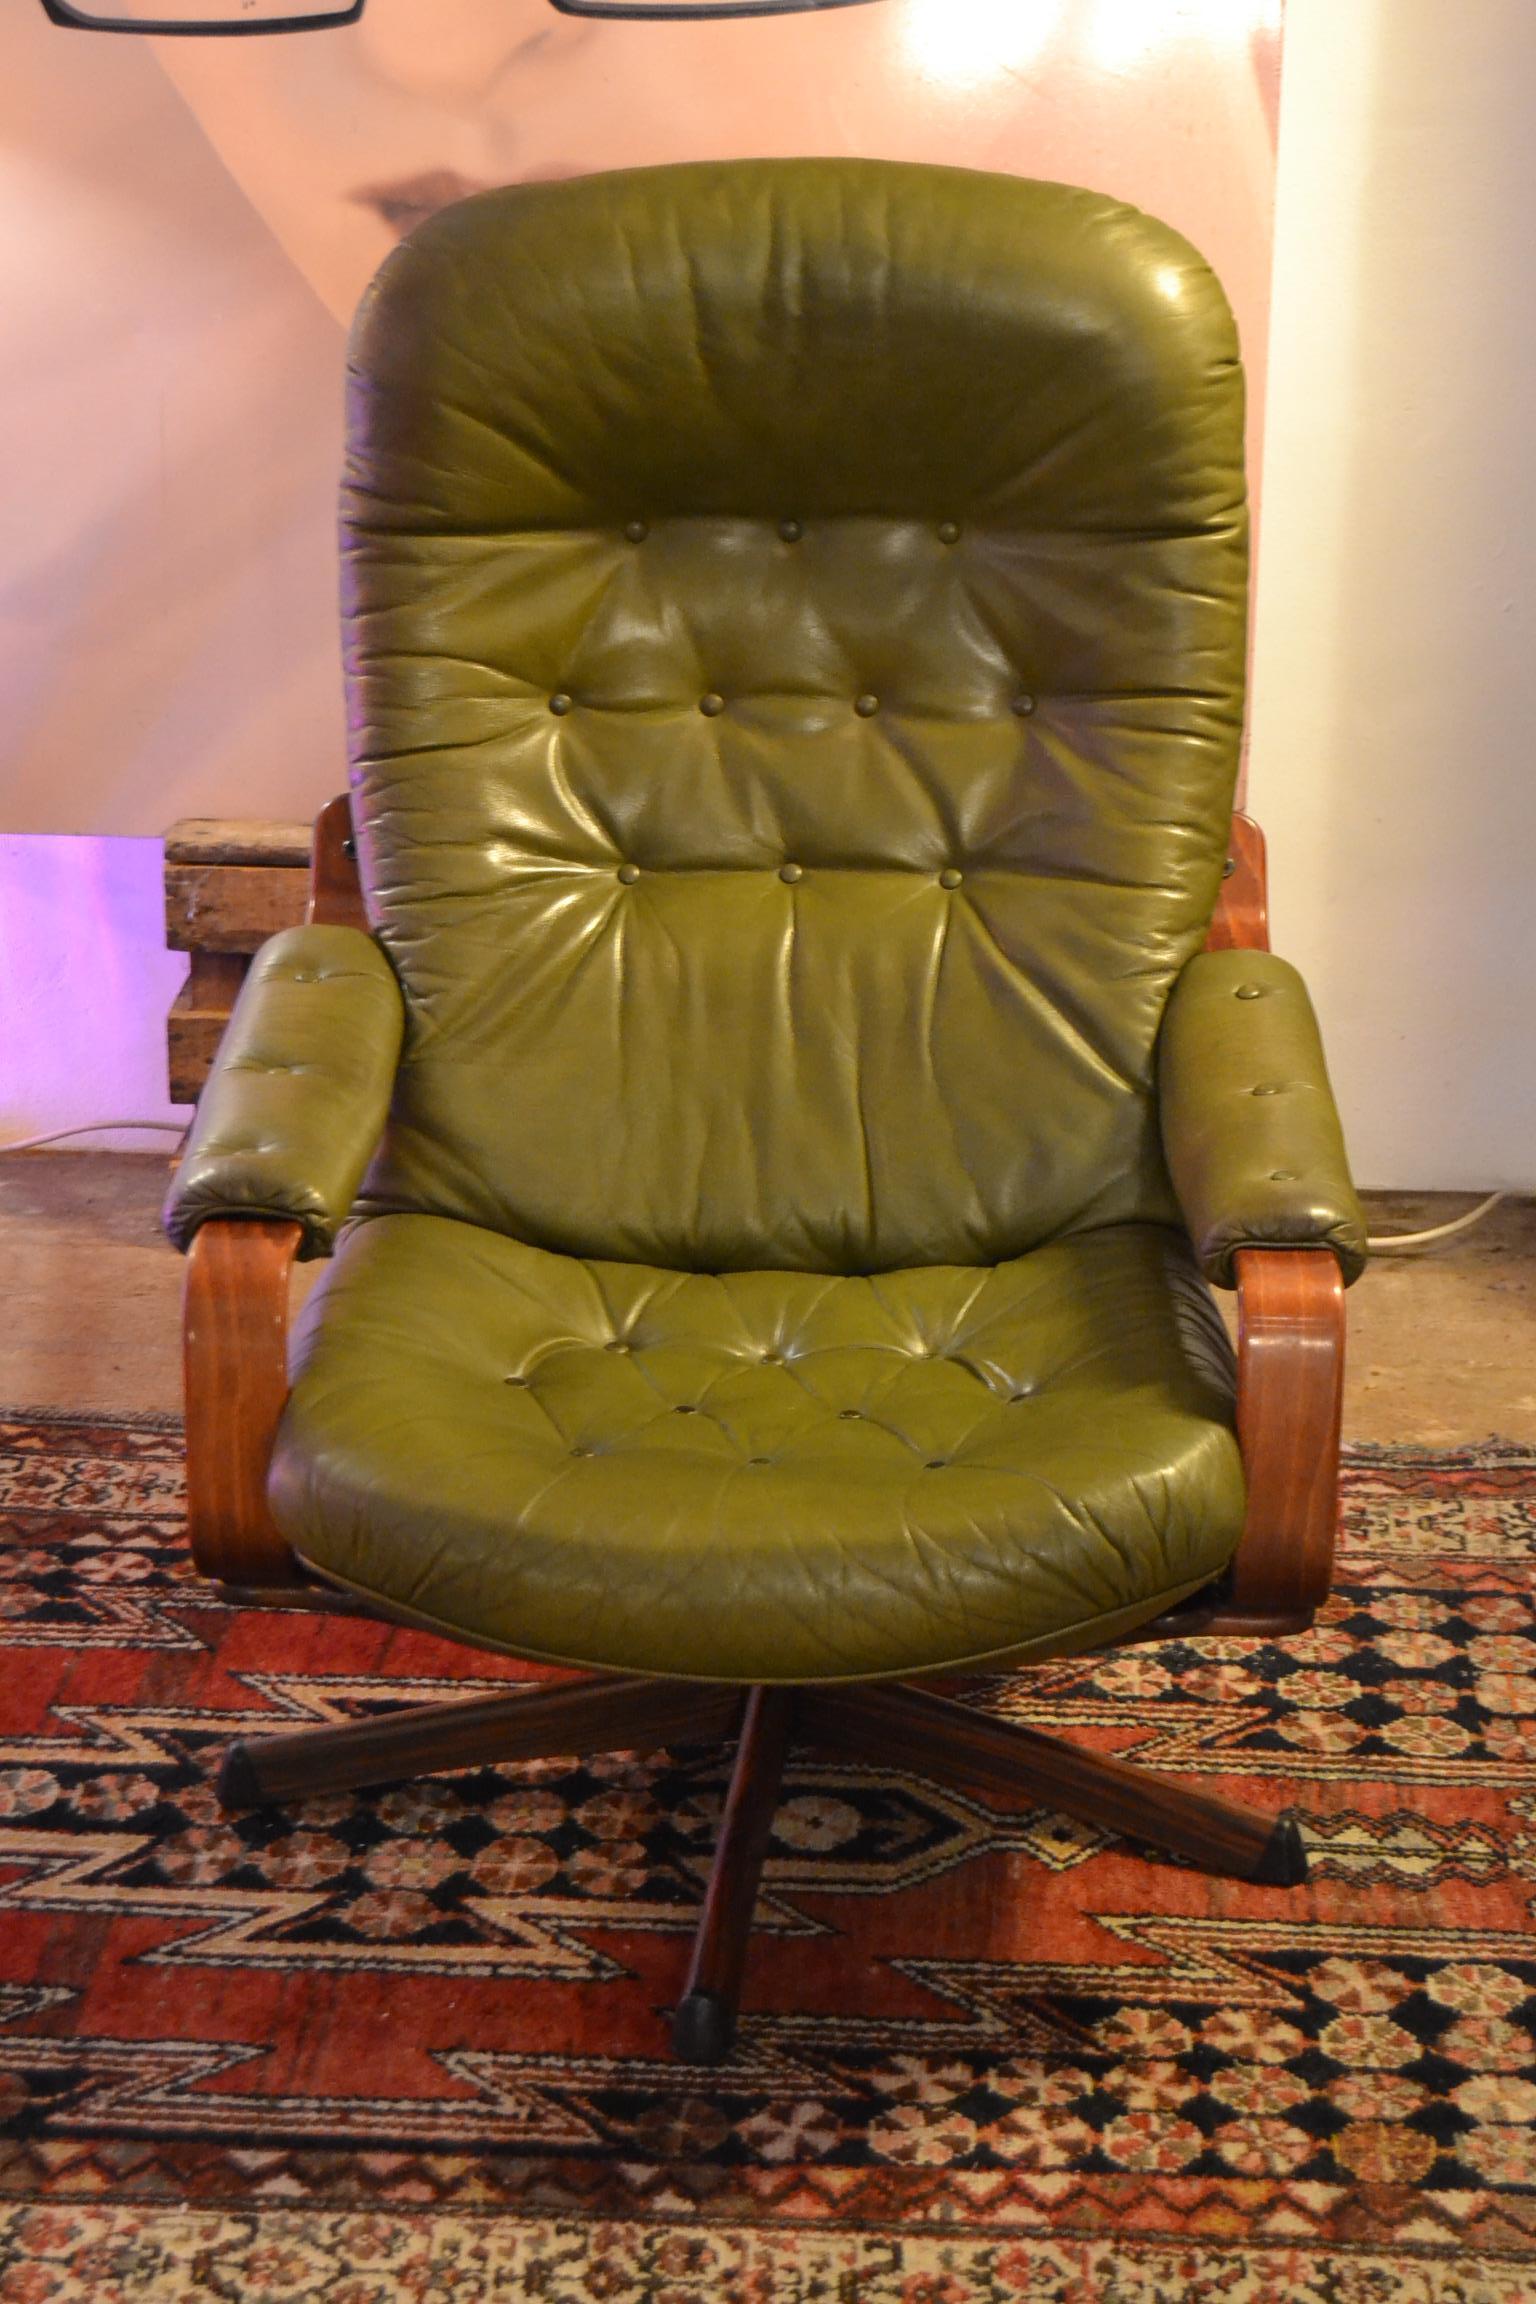 Vintage lounge swivel chair with ottoman from the 1970s,
made by Göte Möbel Nassjo - G-Möbel - Göte Möbler Sweden.
This stylish and relaxing Scandinavian Modern rocking recliner rotating armchair,
has a curved mahogany wooden frame with lattices